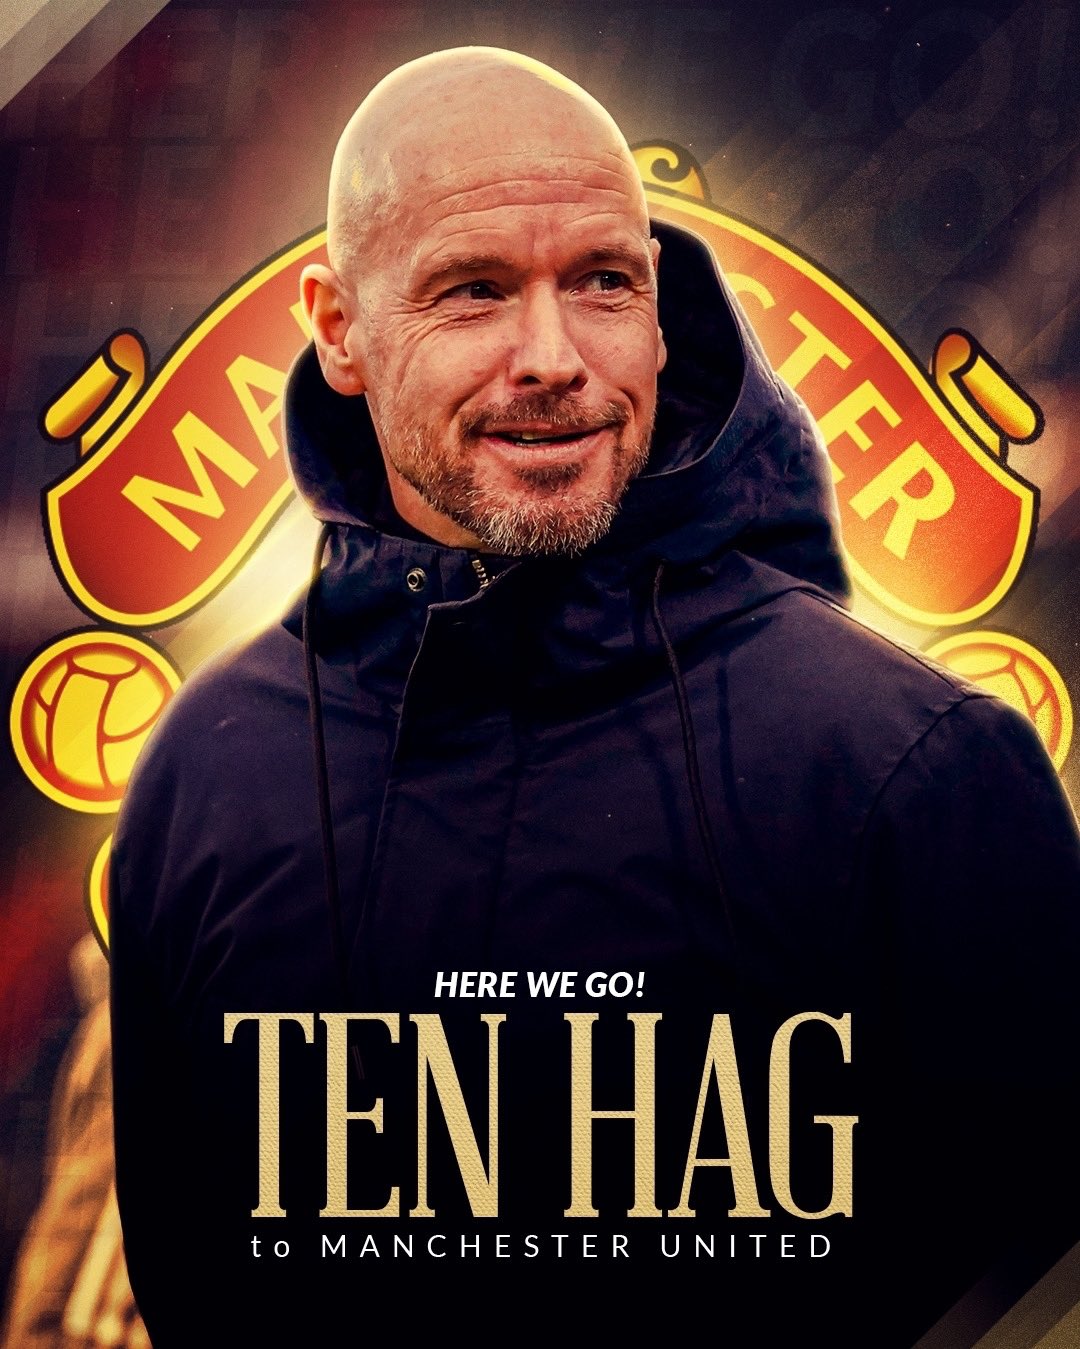 Fabrizio Romano ten Hag to Manchester United, here we go! Agreement on contract now set to be completed. Mitchell van der Gaag, priority candidate for coaching staff